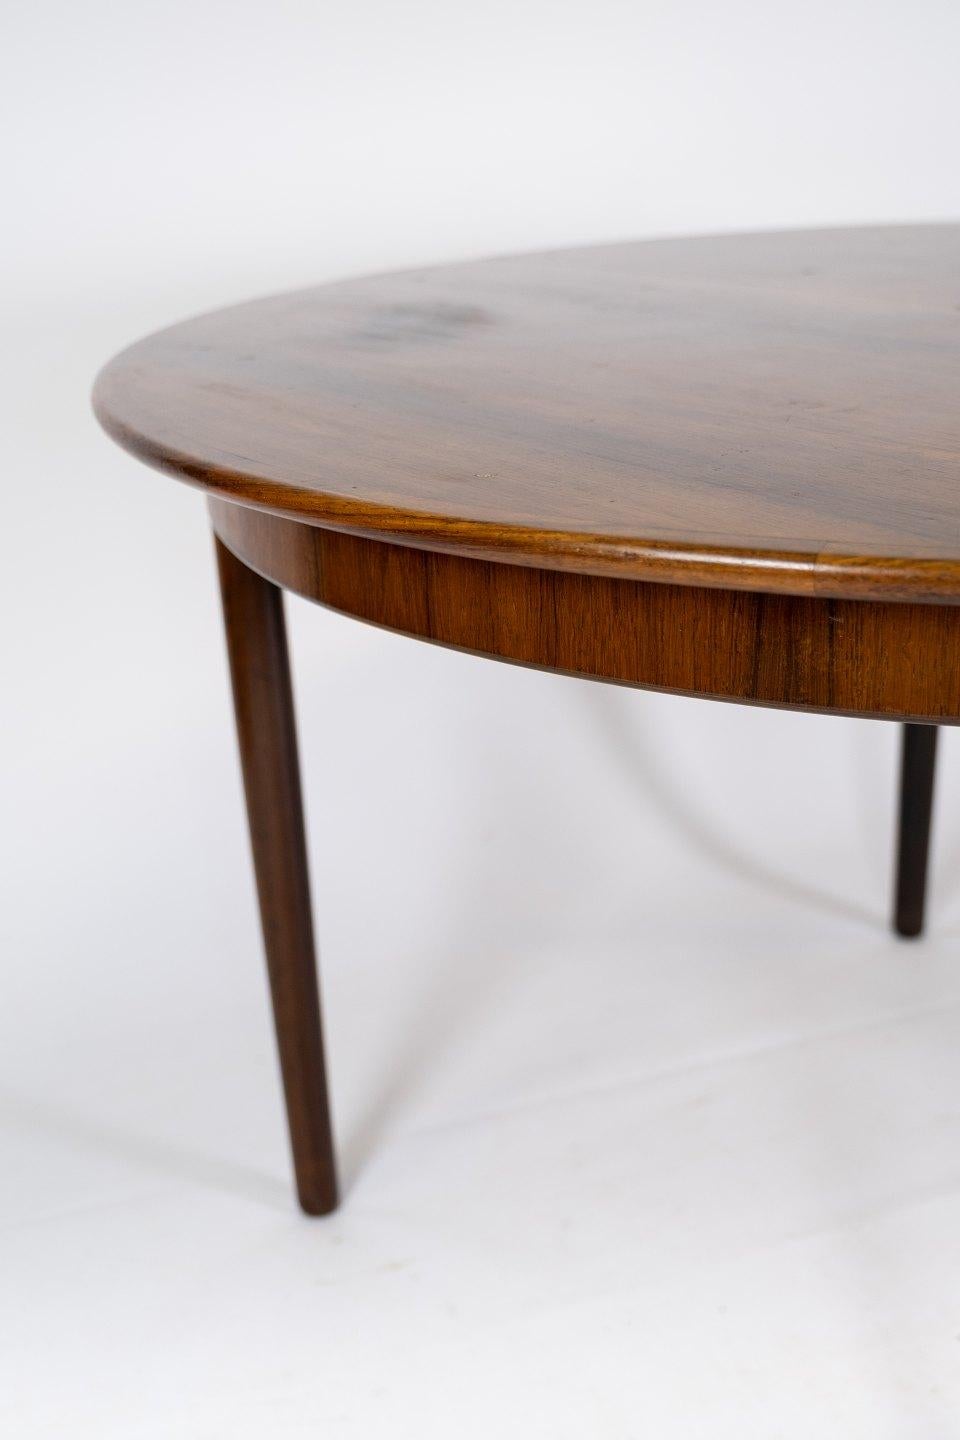 Danish Dining Table in Rosewood Designed by Arne Vodder from the 1960s For Sale